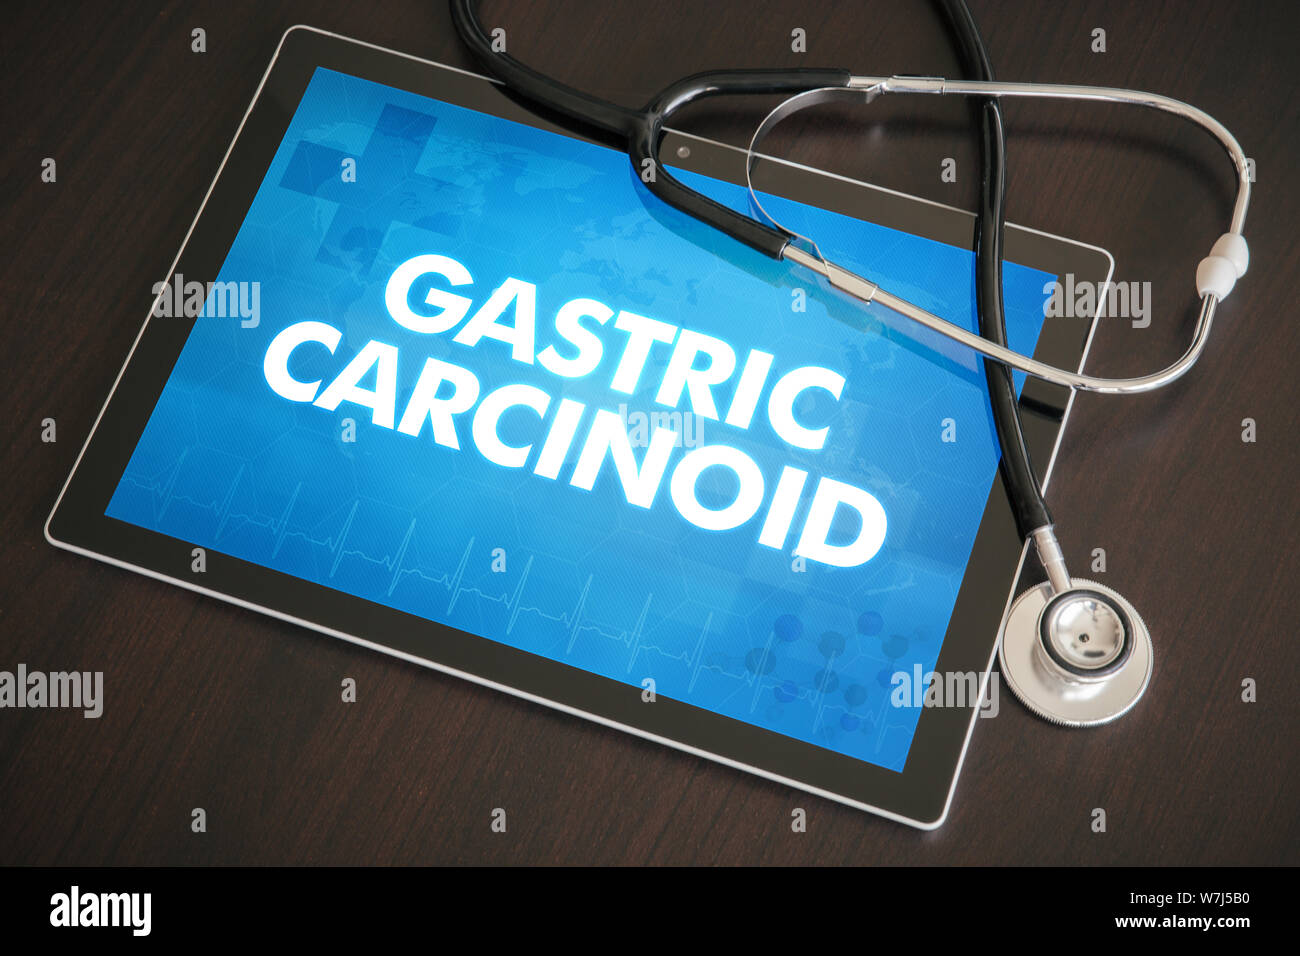 Gastric carcinoid (cancer type) diagnosis medical concept on tablet screen with stethoscope. Stock Photo